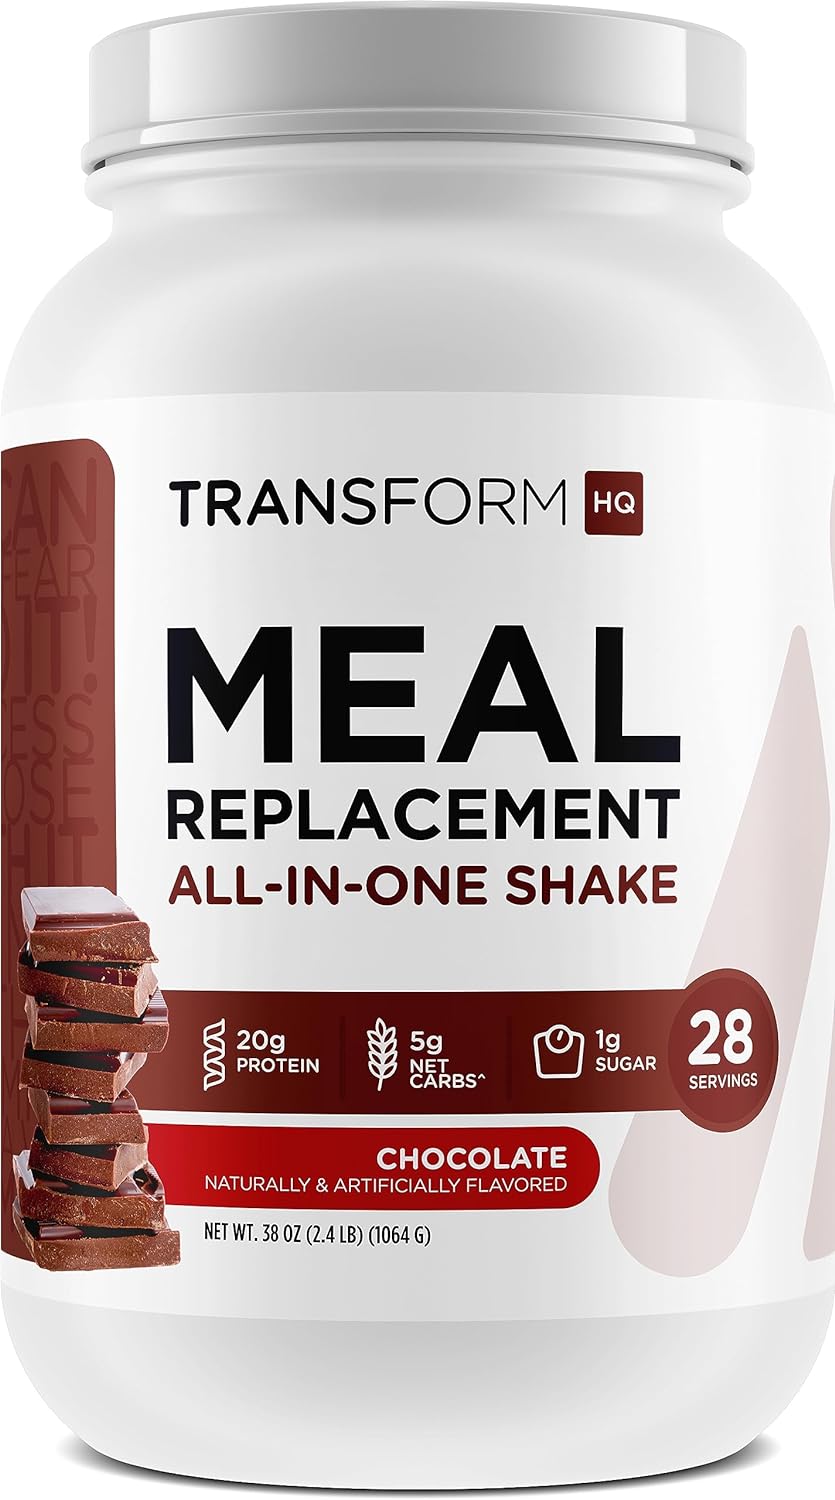 TransformHQ Meal Replacement Shake Powder 28 Servings (Chocolate) - Gl2.6 Pounds